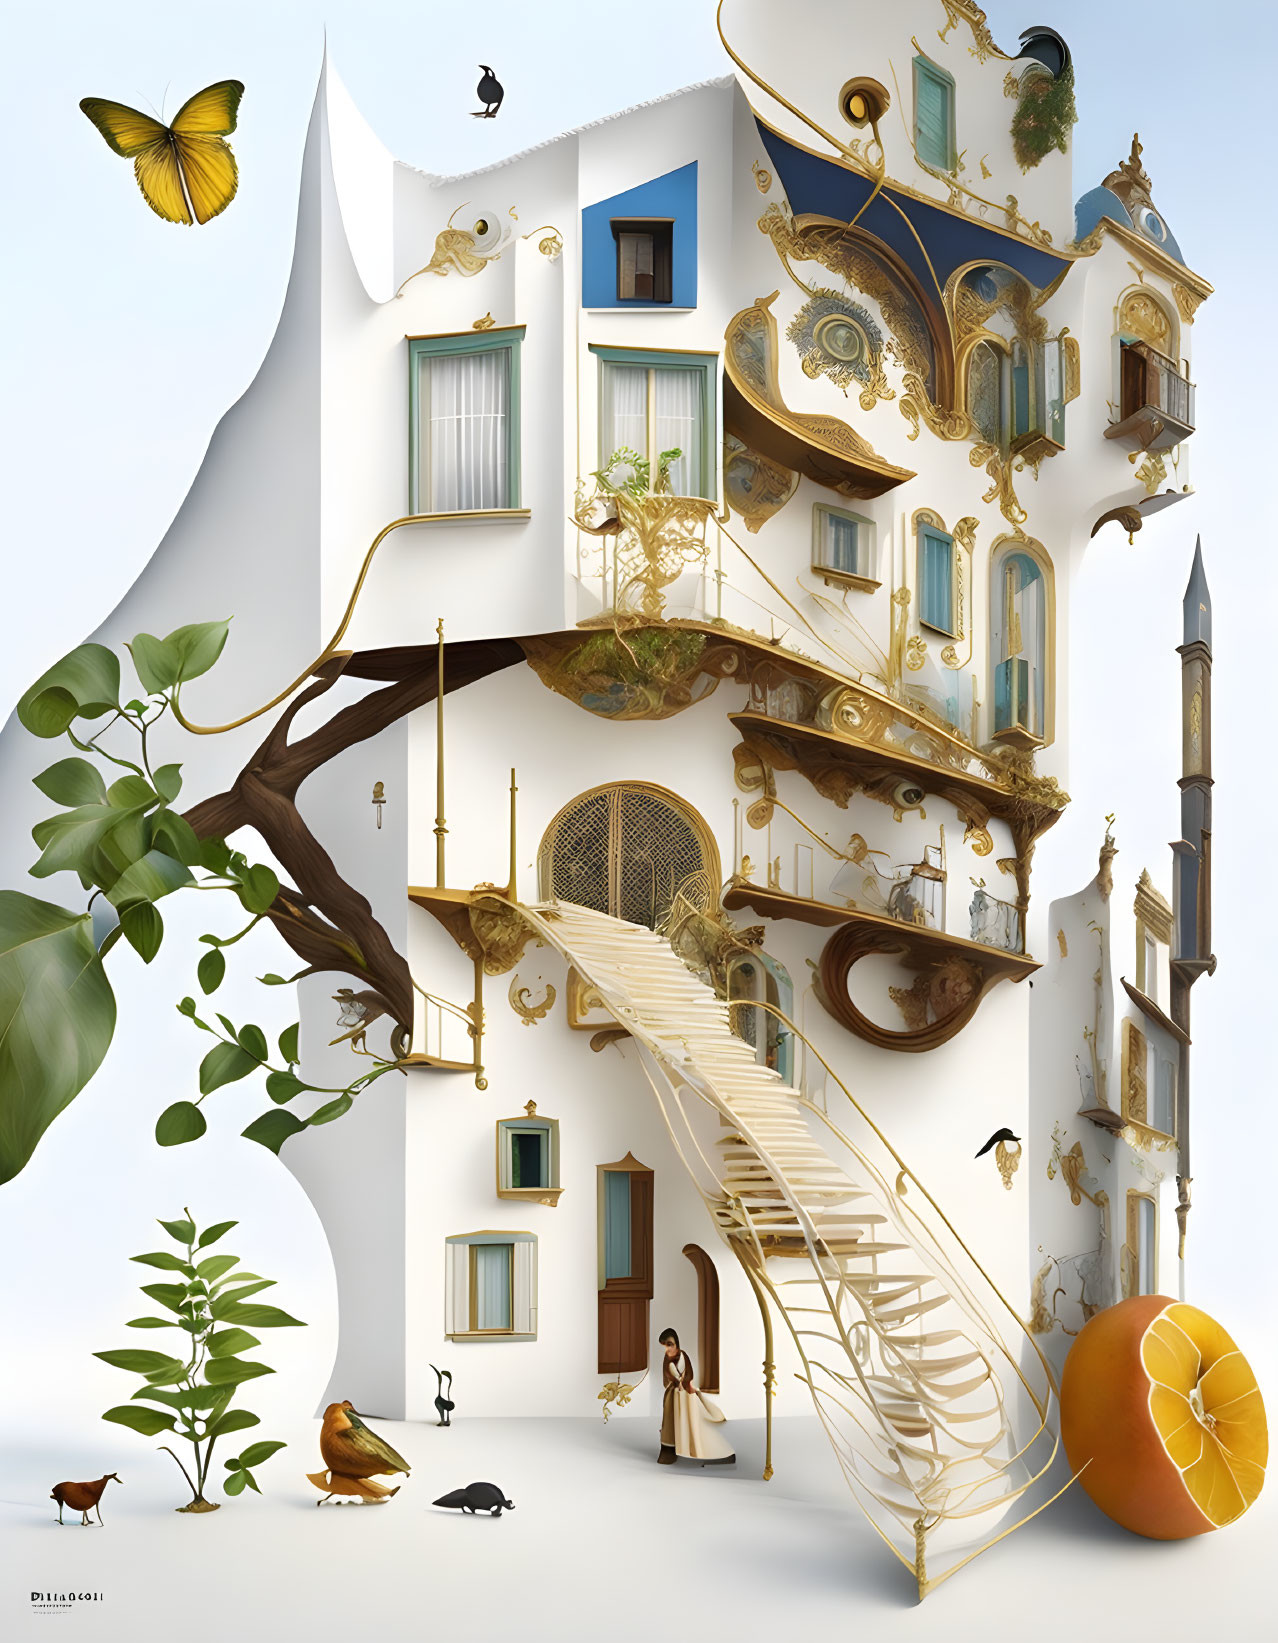 Distorted baroque building with tree, animals, lady on stairs.